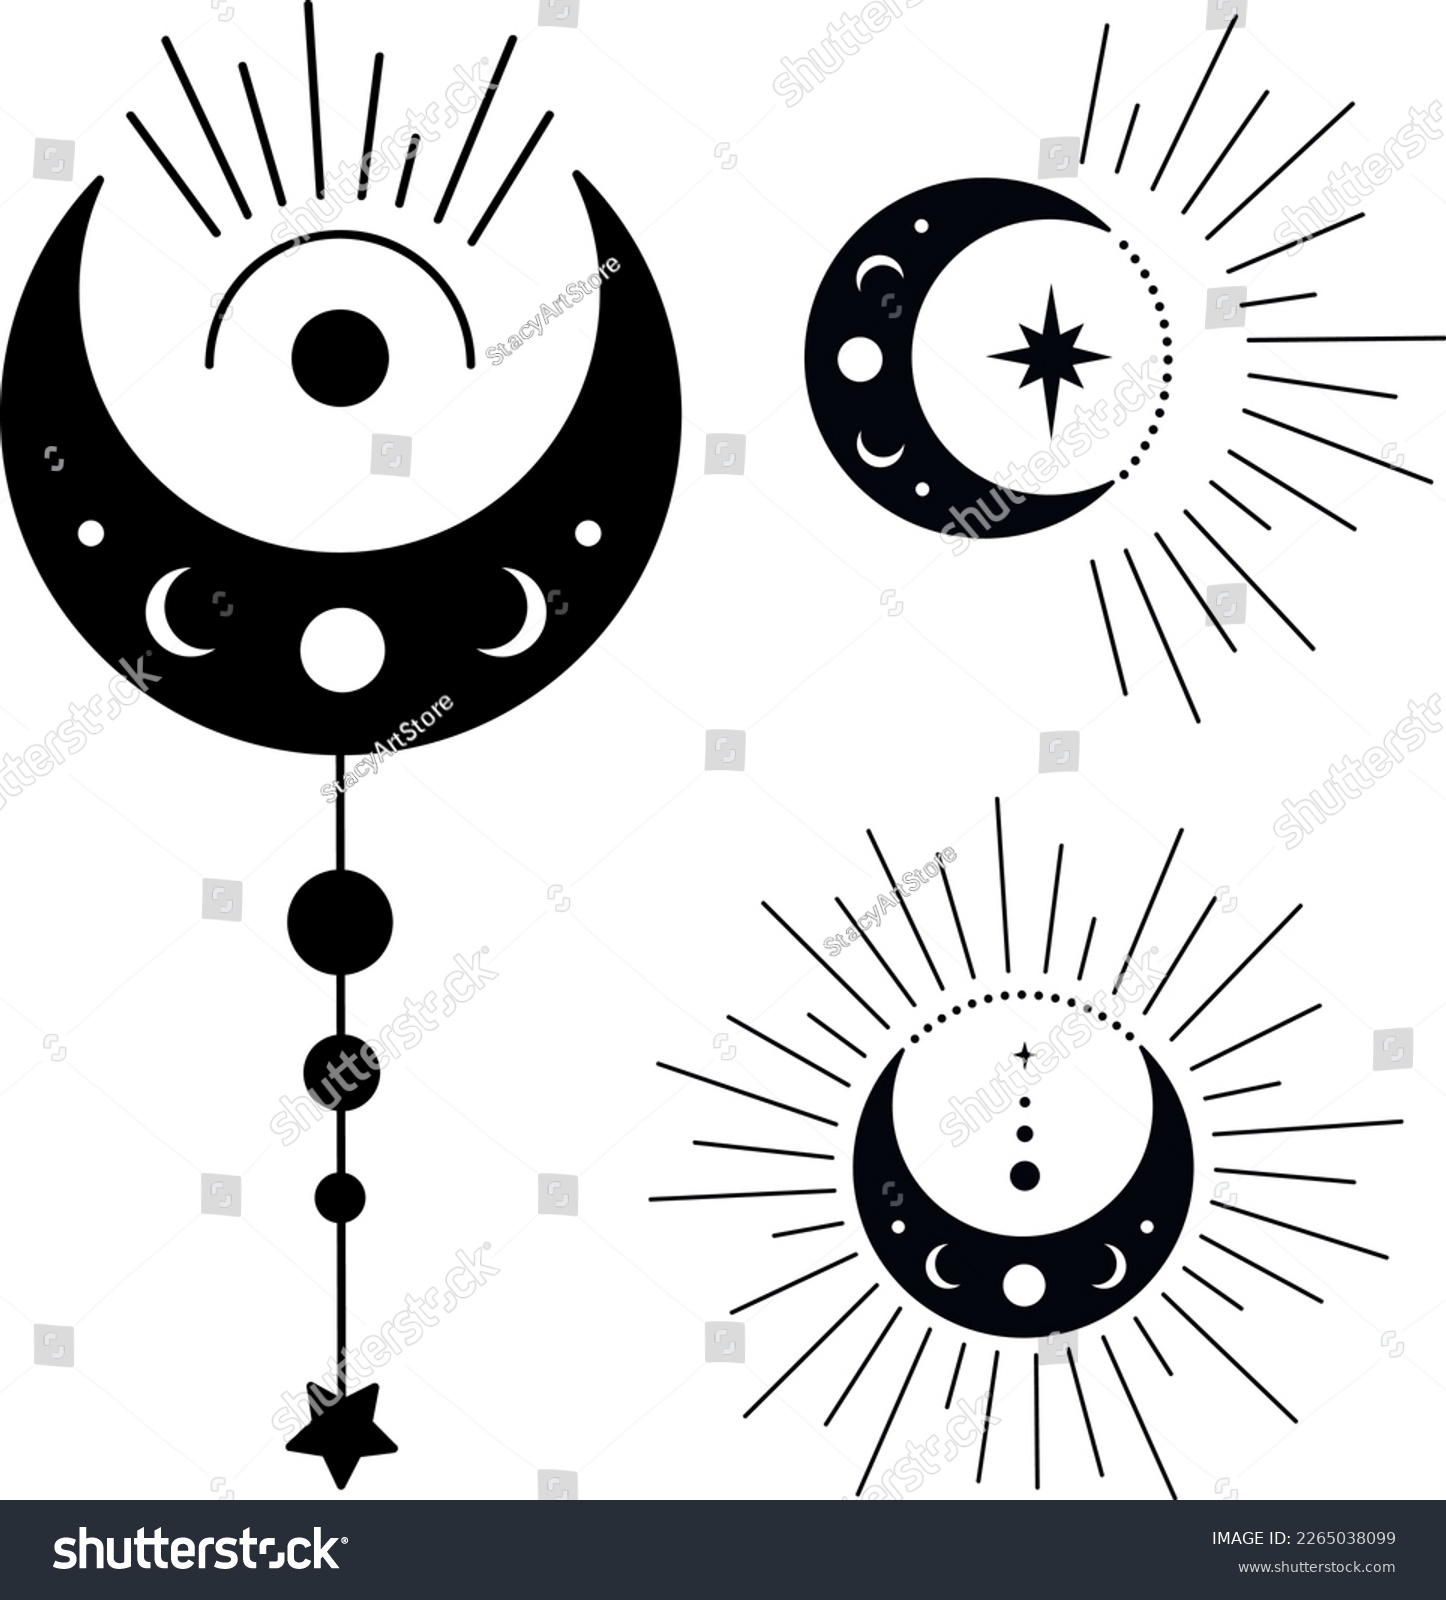 SVG of Bohemian Crescent Moon with Stars and Rays Astrology Illustration. Moon Phases SVG Vector Clipart. Celestial, Mystical, Esoteric designs perfect for Printing. T-shirt, Mugs, Cut Boards Cut File  svg